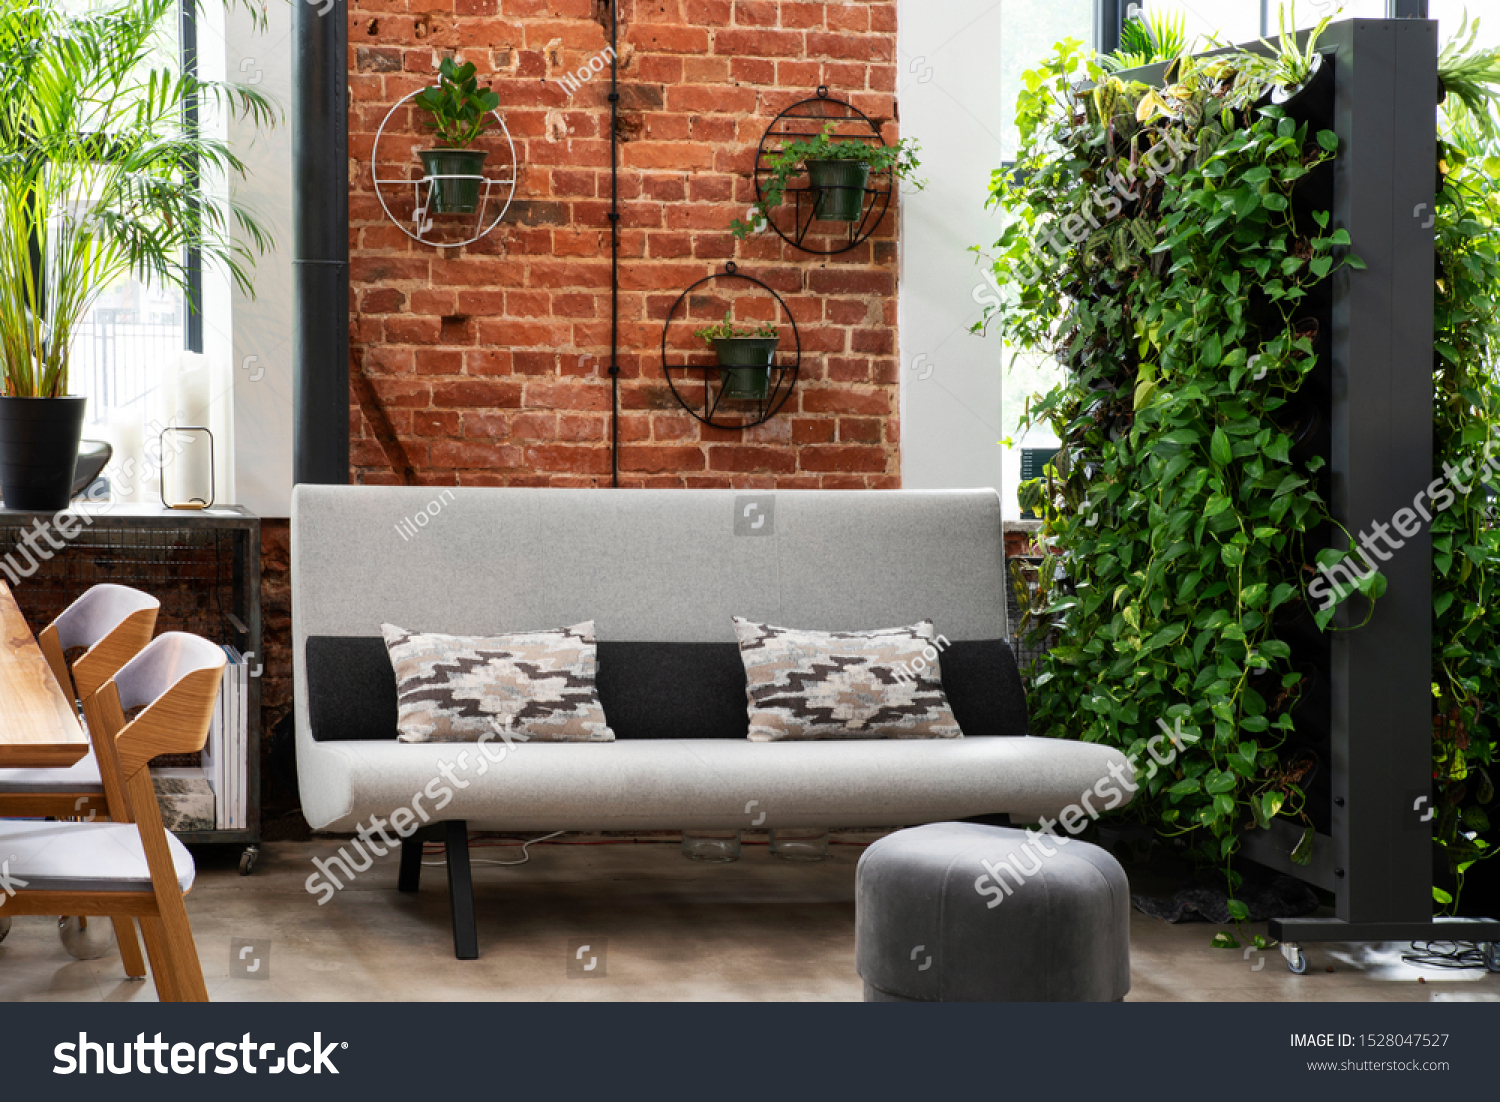 Stock Photo Modern Interior Of Living Room With Red Bricky Wall And Green Vertical Garden In Loft Apartment 1528047527 